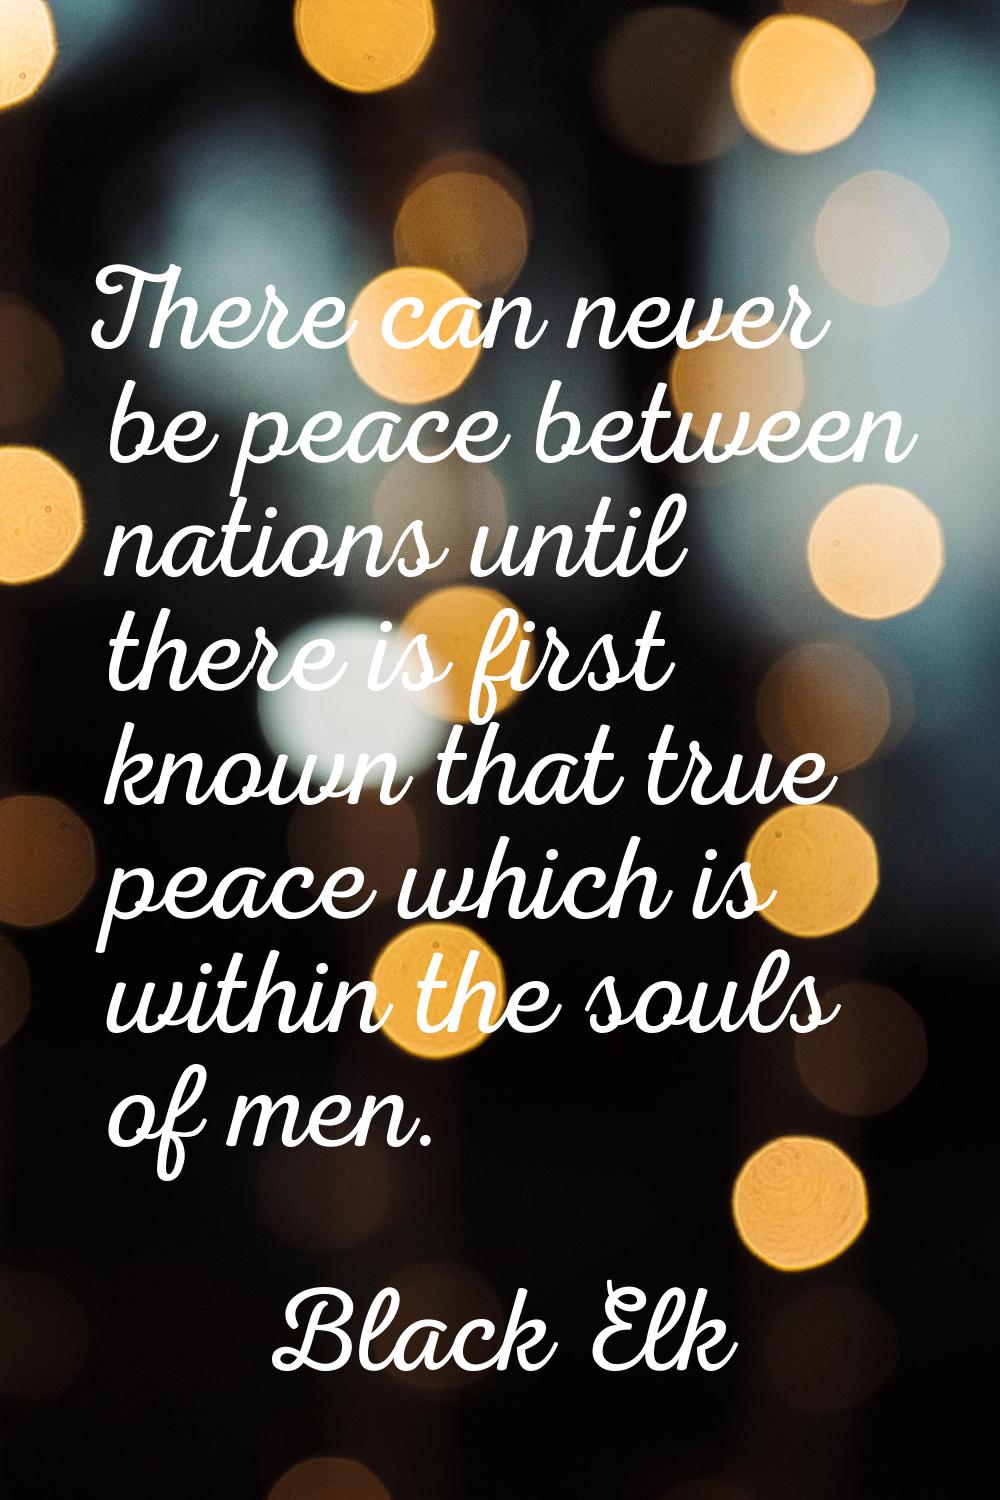 There can never be peace between nations until there is first known that true peace which is within